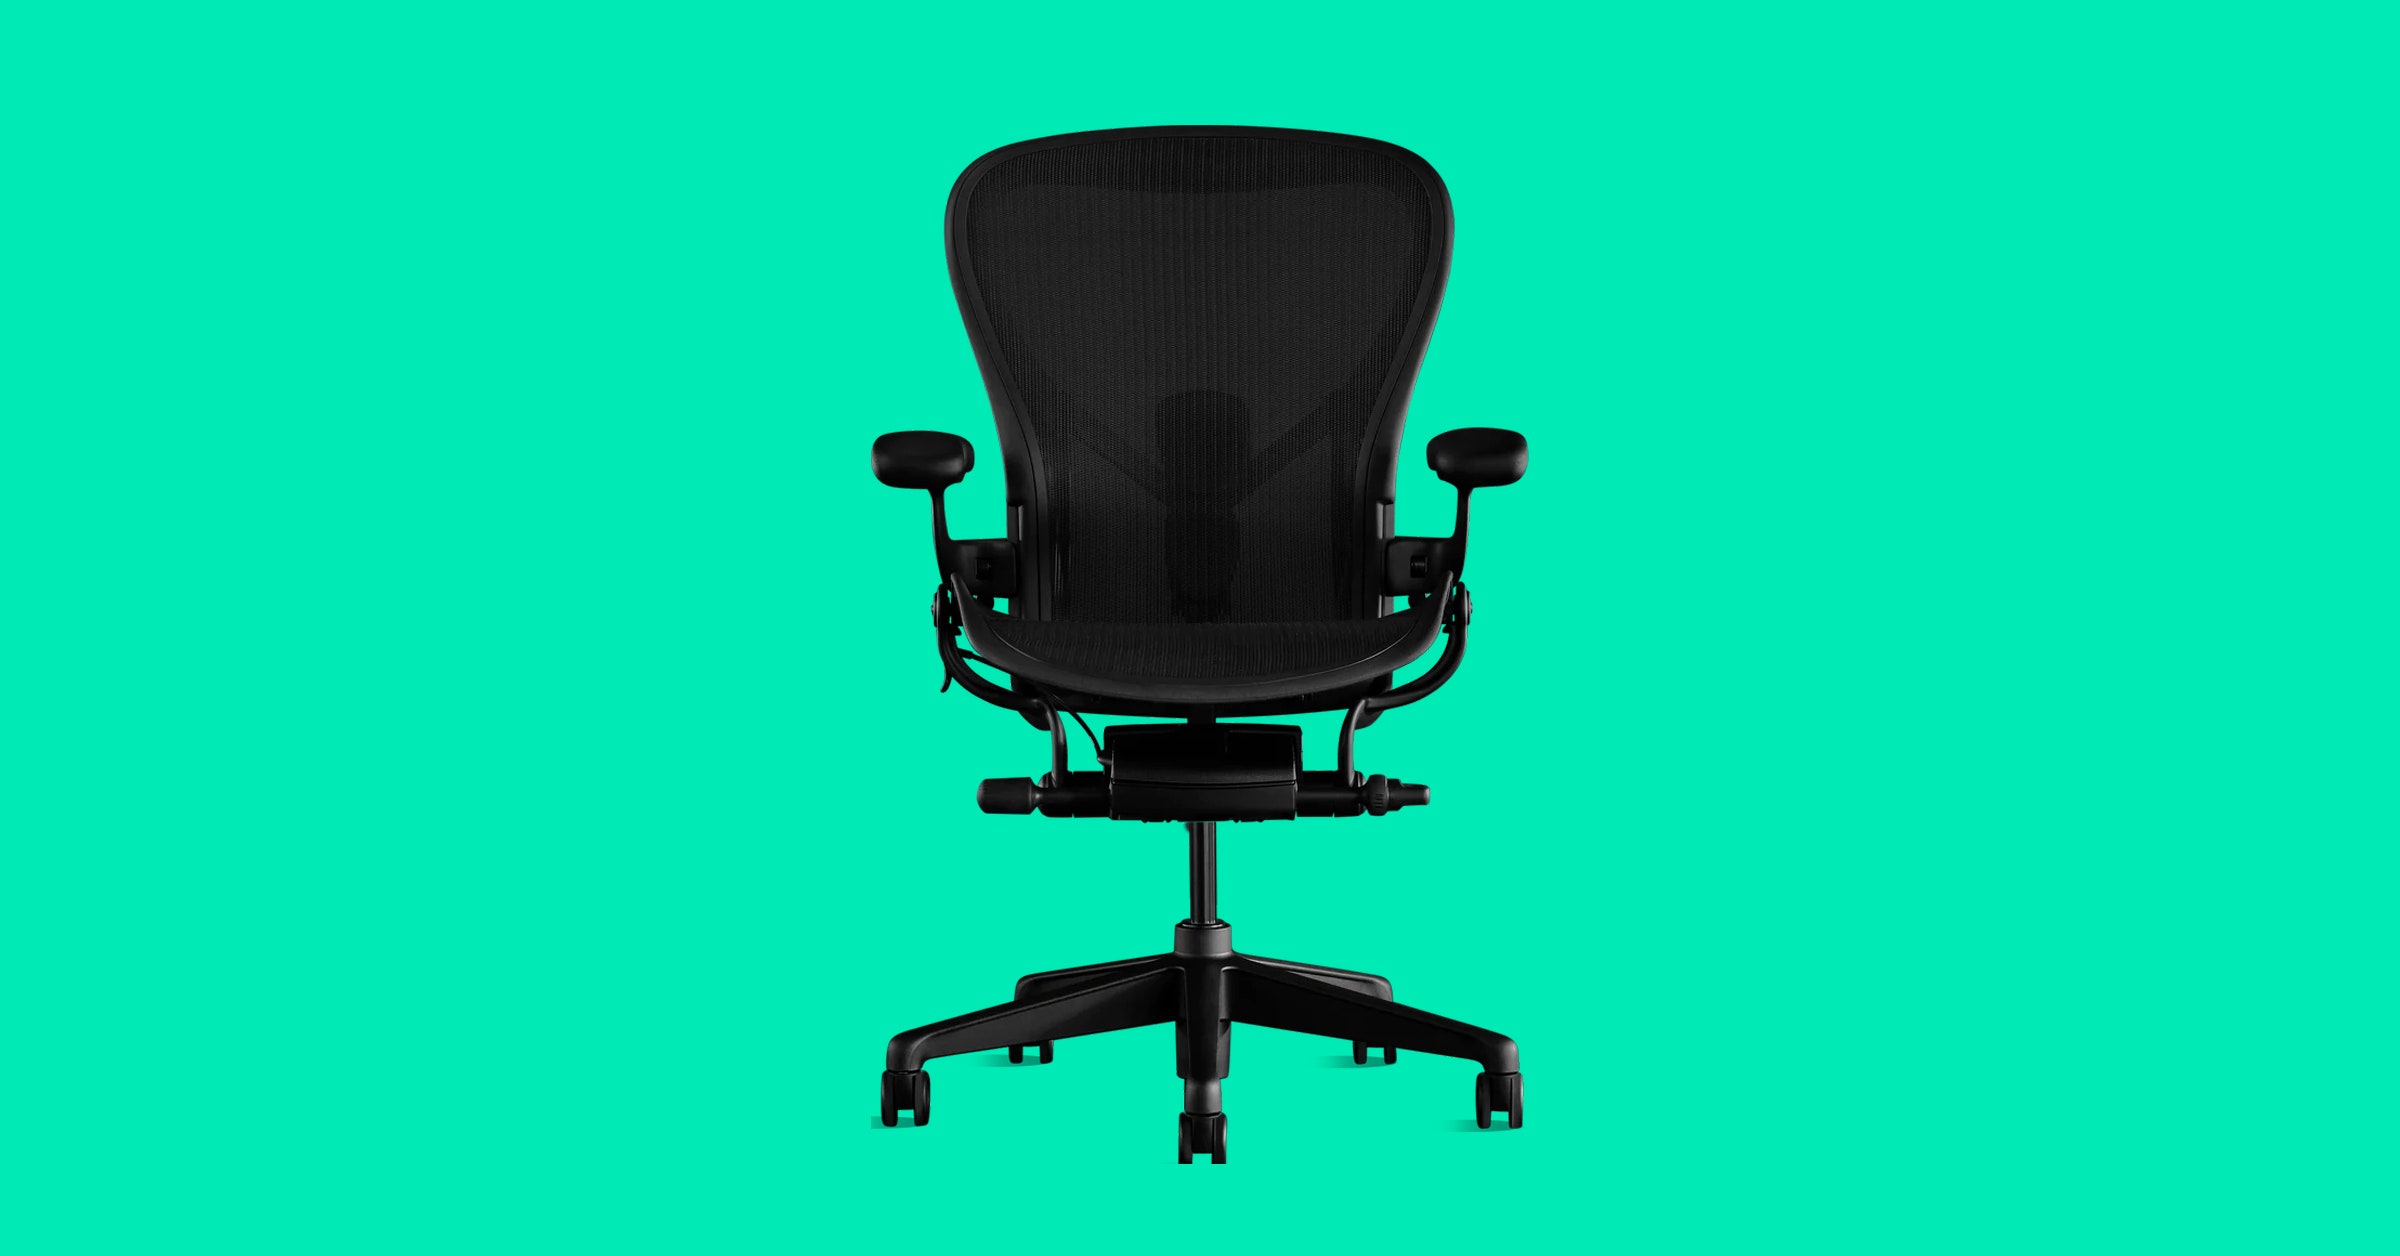 The 13 Best Office Chairs (2022): Budget, Luxe, Cushions, Casters, and Mats